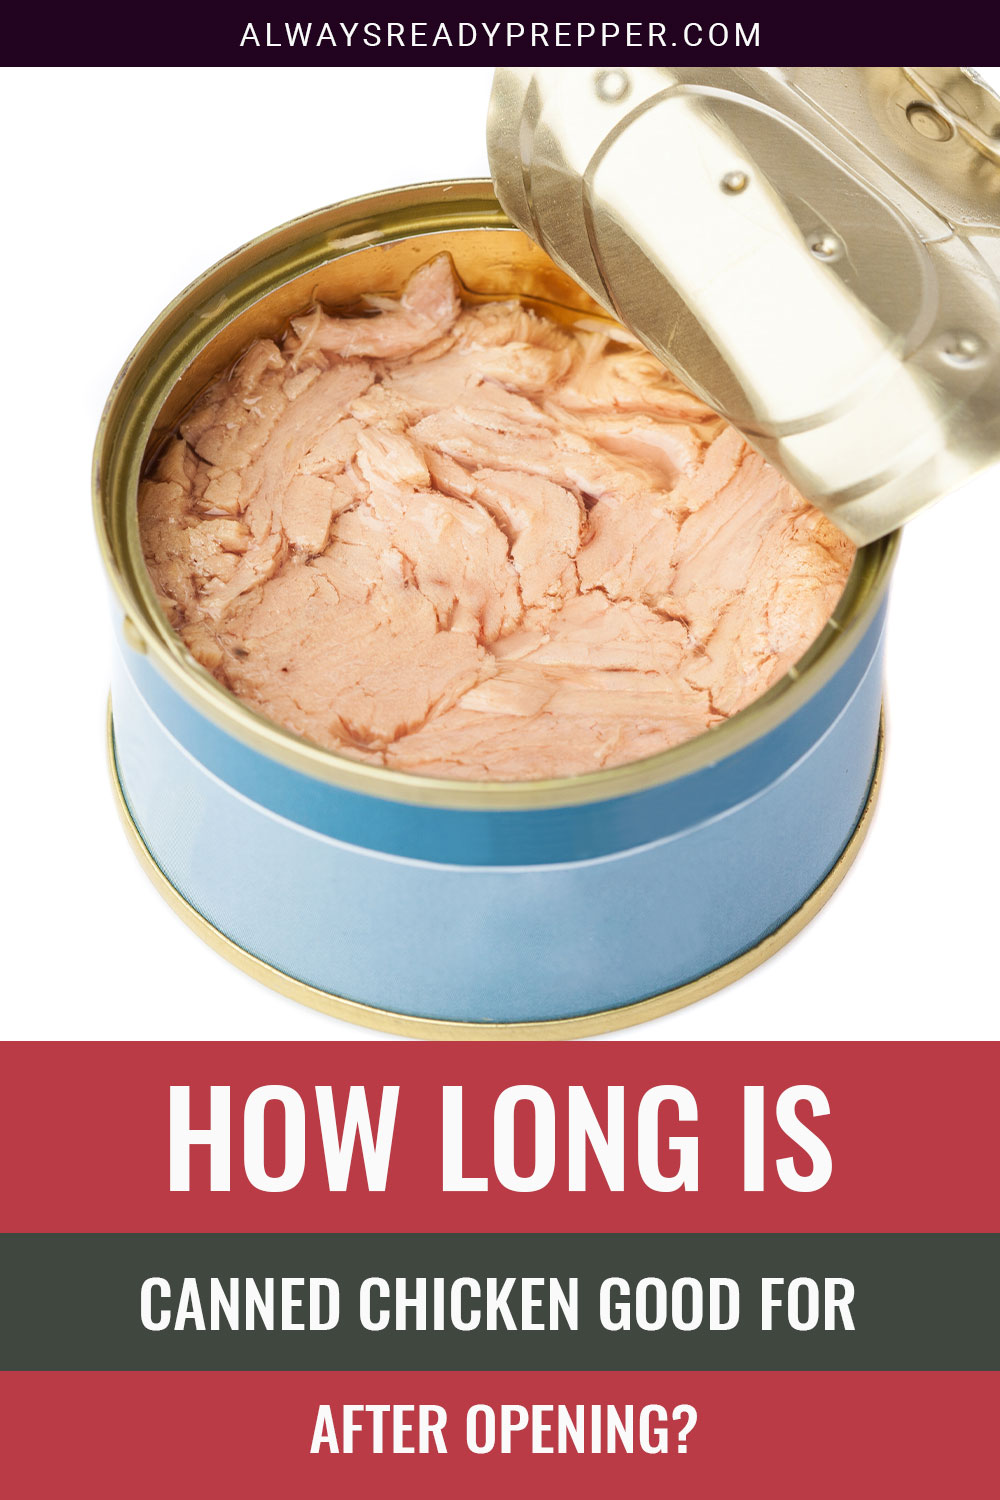 An opened can of chicken on a white surface - How Long is Canned Chicken Good For After Opening?